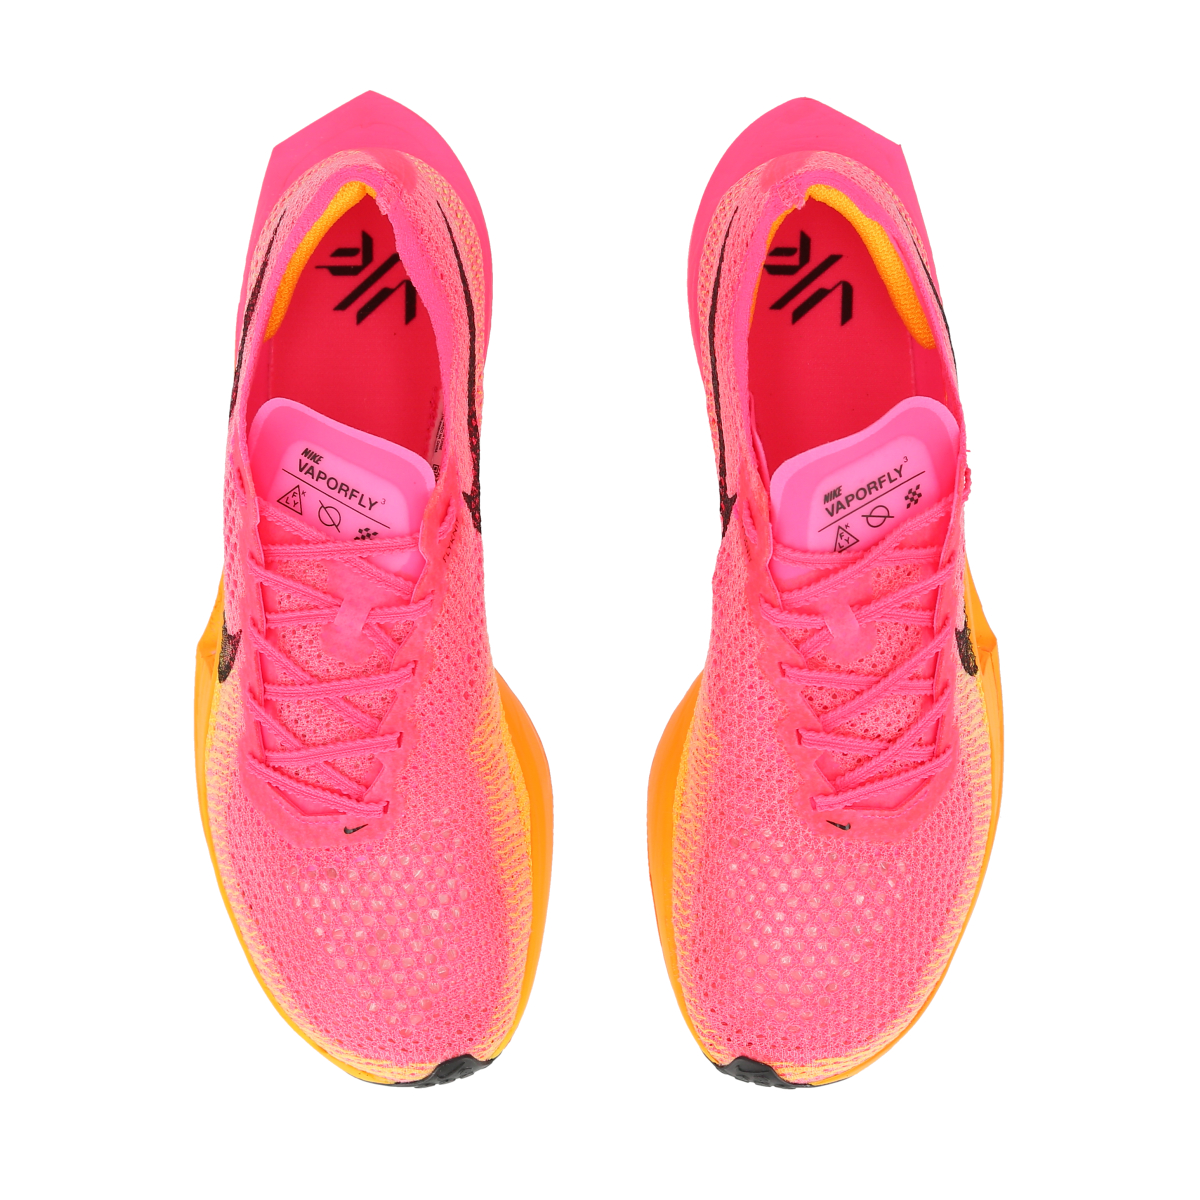 Zapatillas Running Nike Zoomx Vaporfly 3 Mujer,  image number null